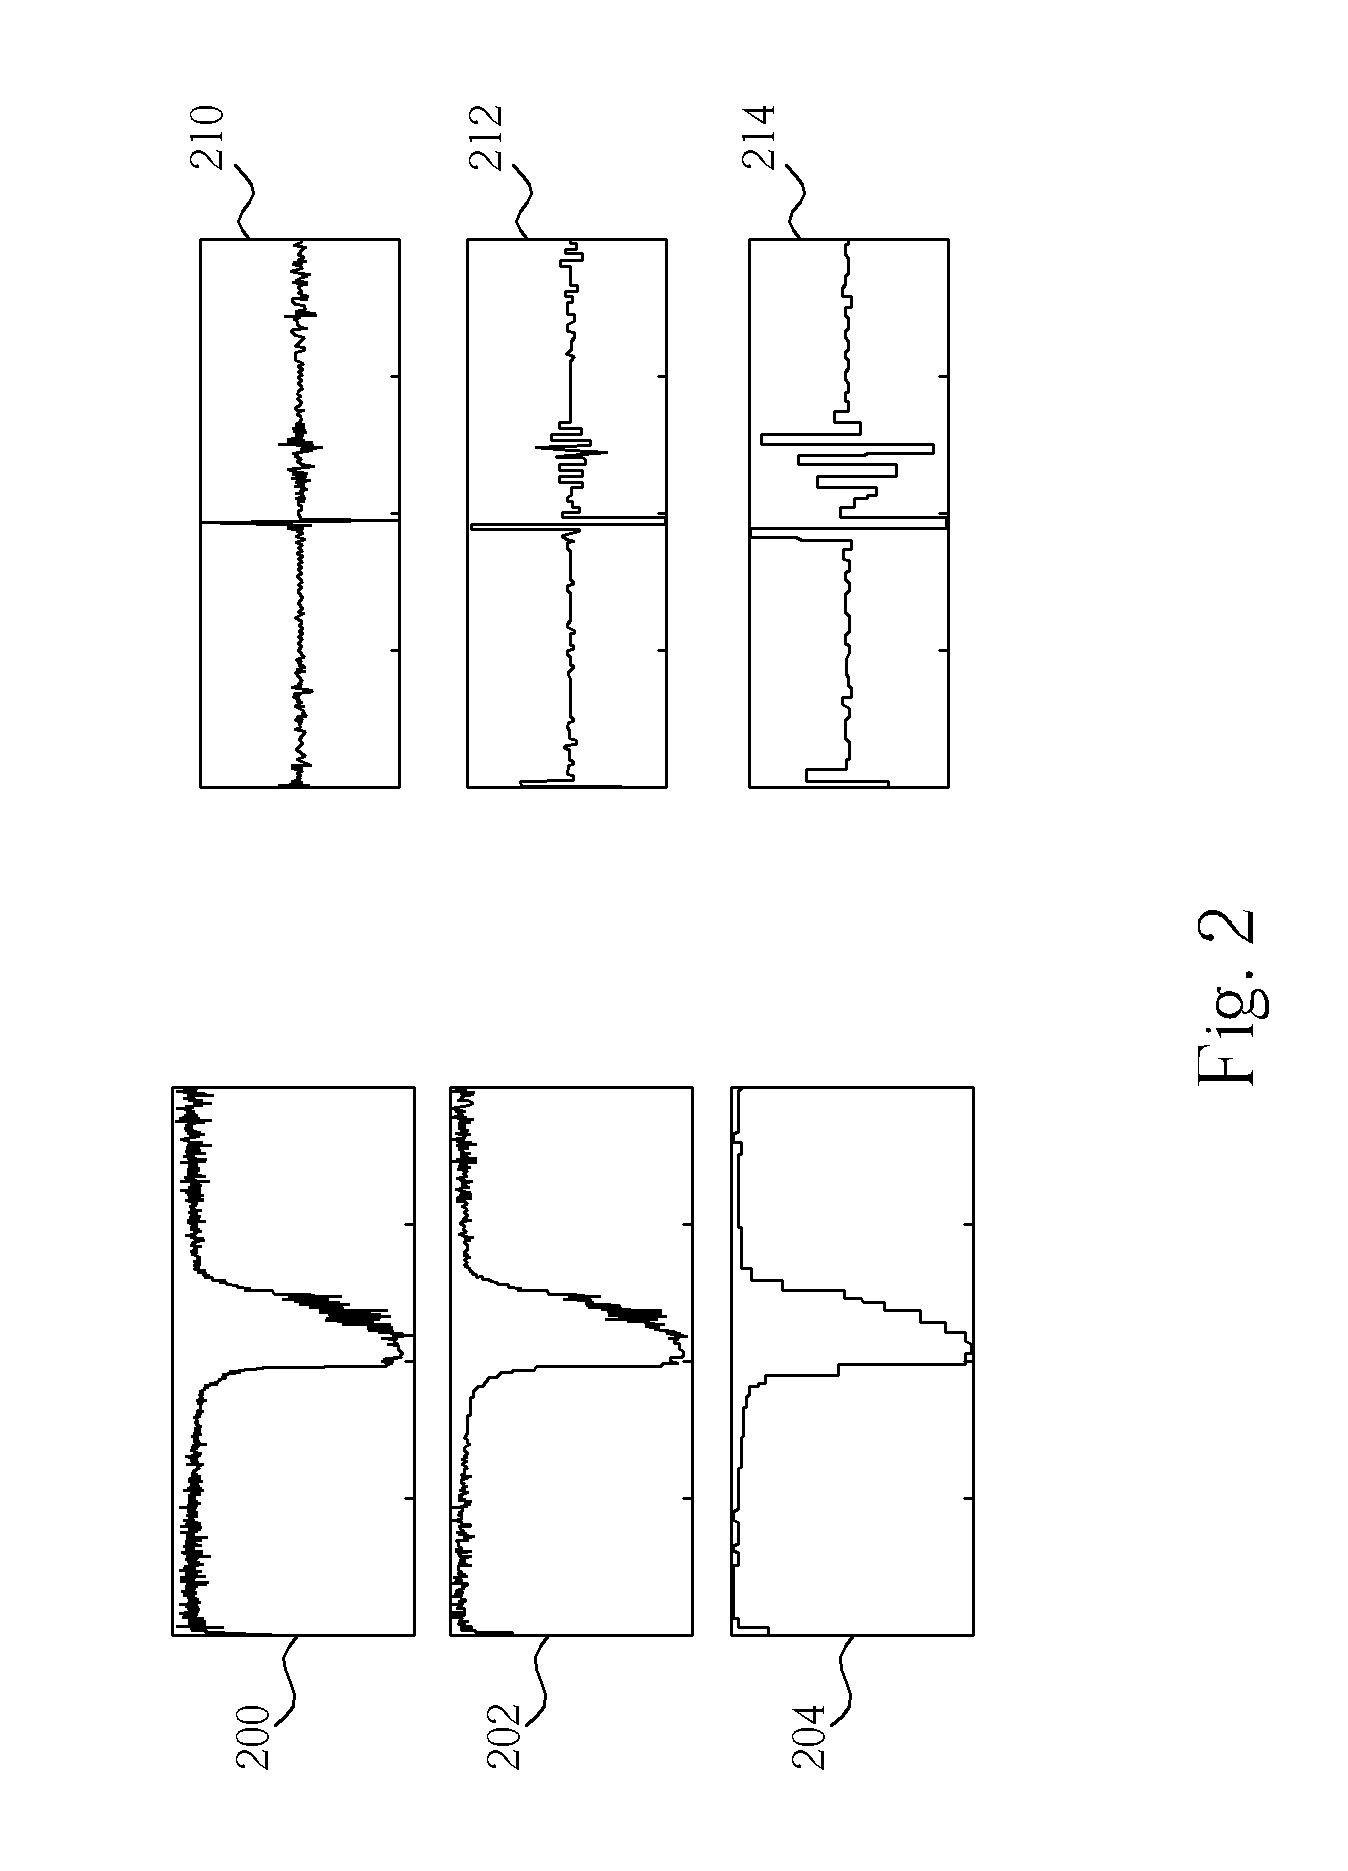 Method and device for cost-function based handoff determination using wavelet prediction in vertical networks